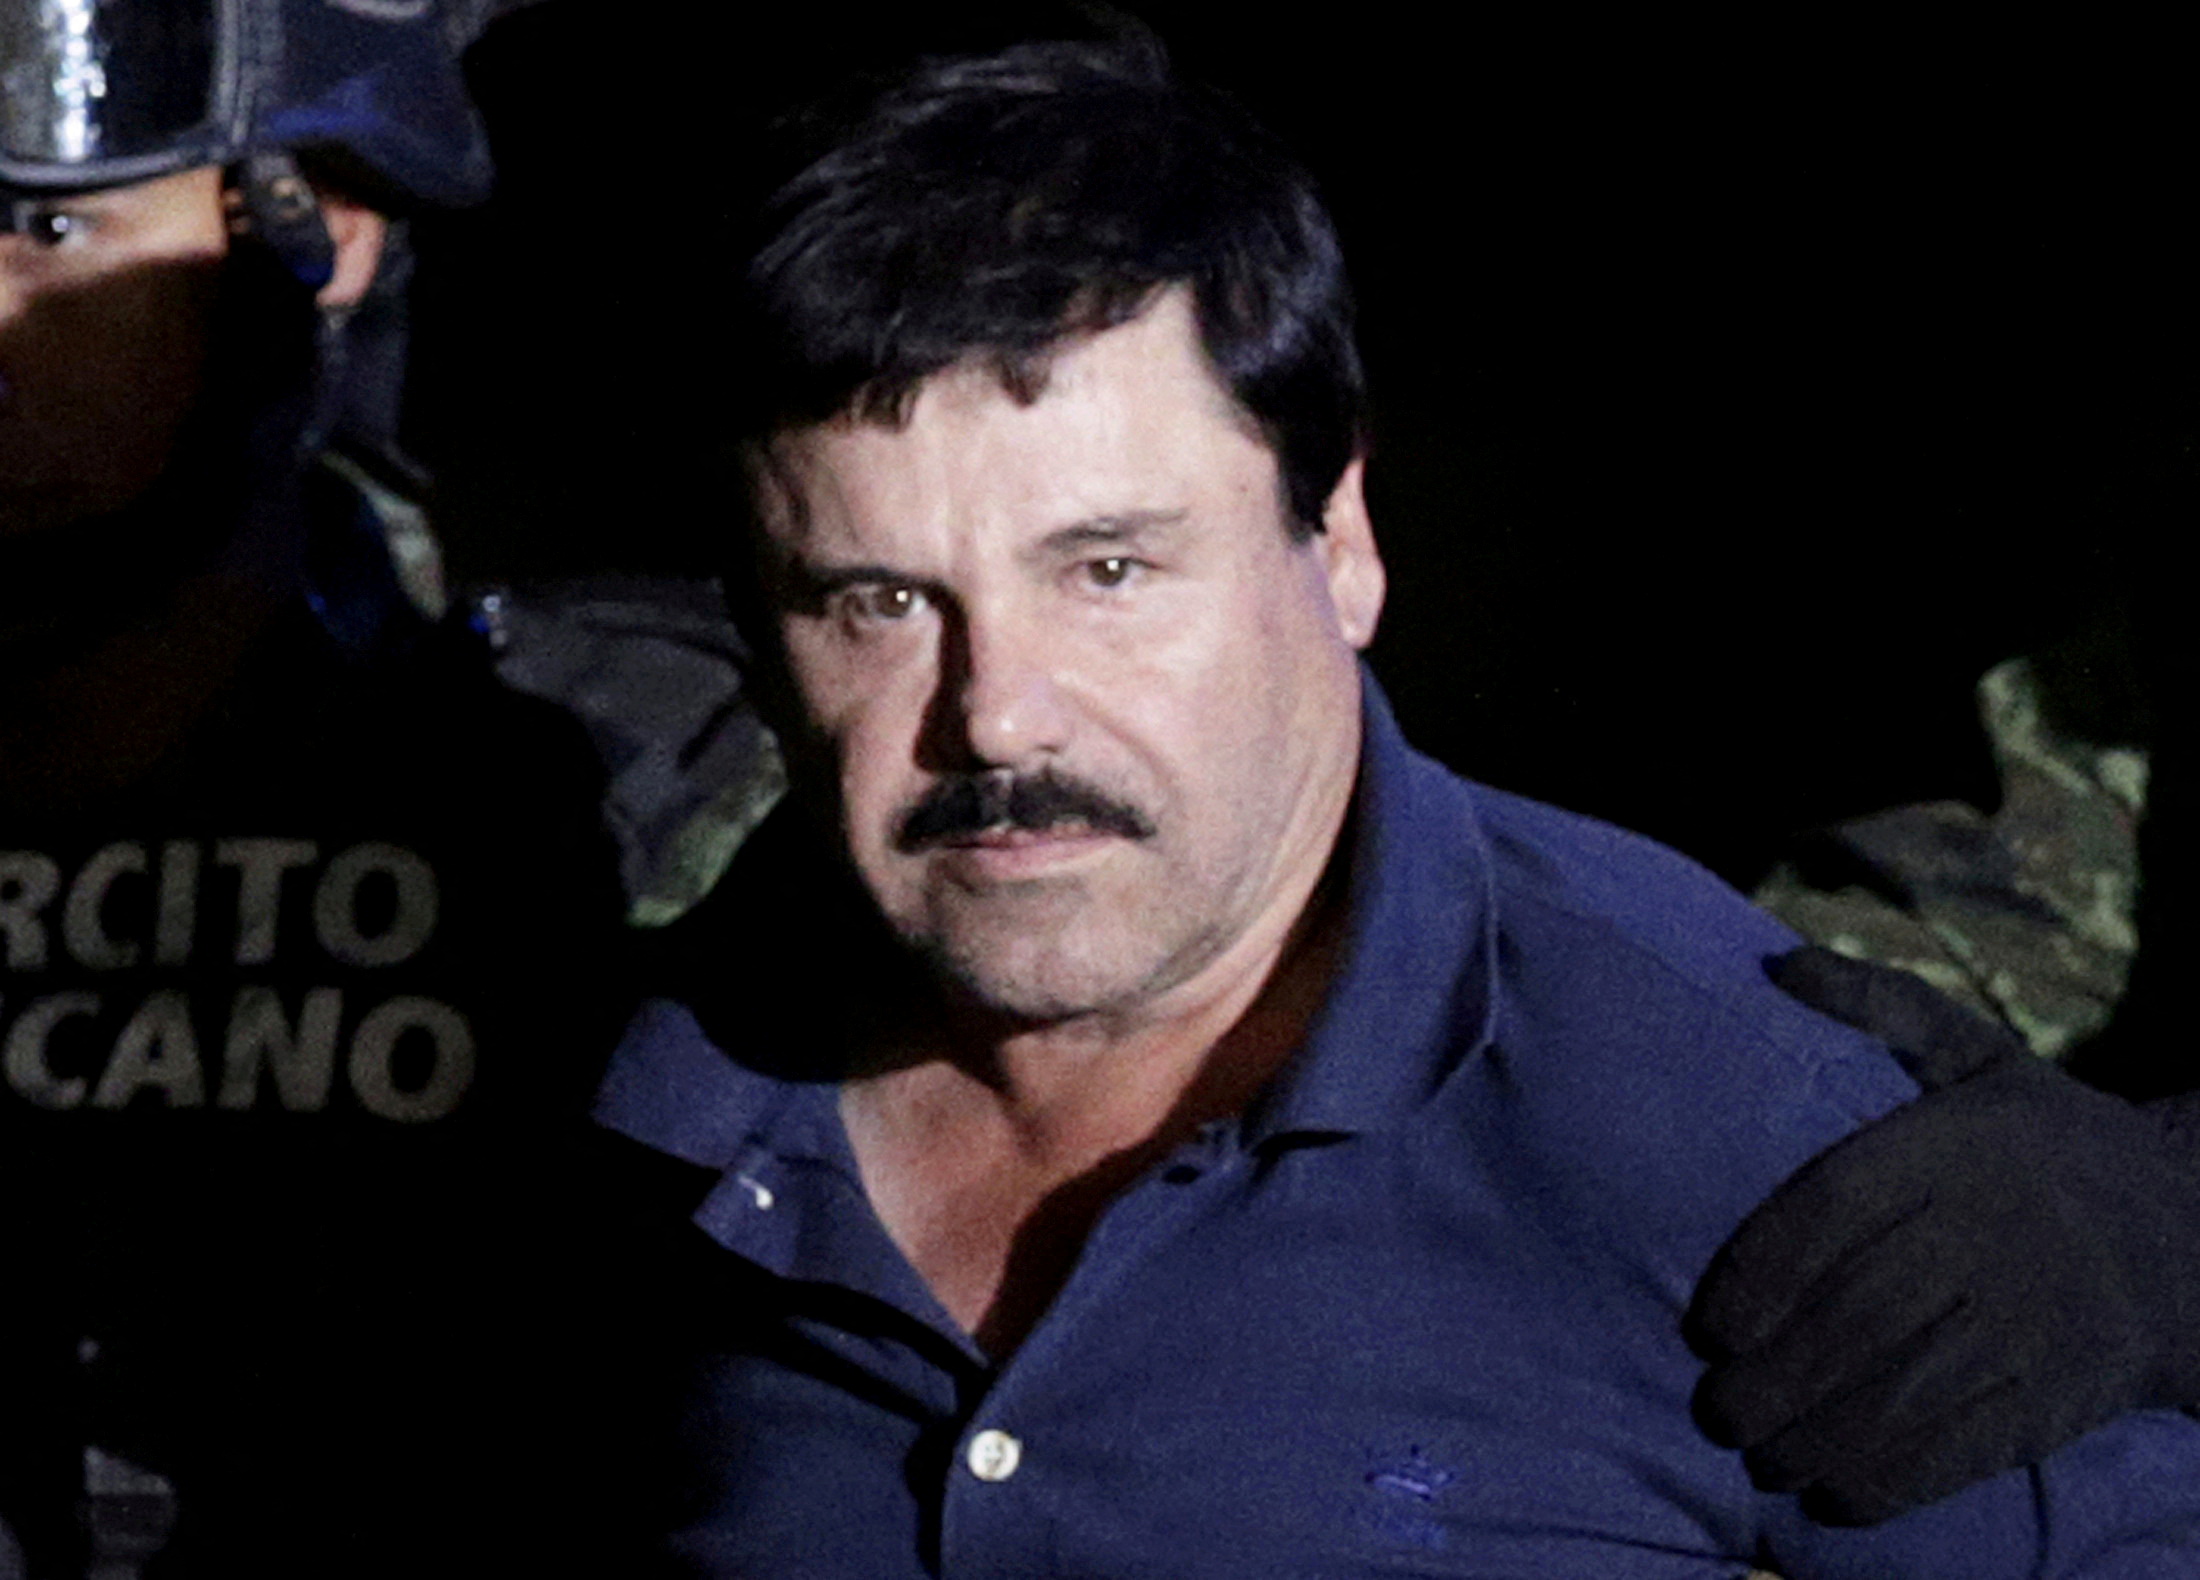 FILE PHOTO: FILE PHOTO: Recaptured drug lord Joaquin "El Chapo" Guzman is escorted by soldiers at the hangar belonging to the office of the Attorney General in Mexico City, Mexico January 8, 2016. REUTERS/Henry Romero/File Photo/File Photo/File Photo